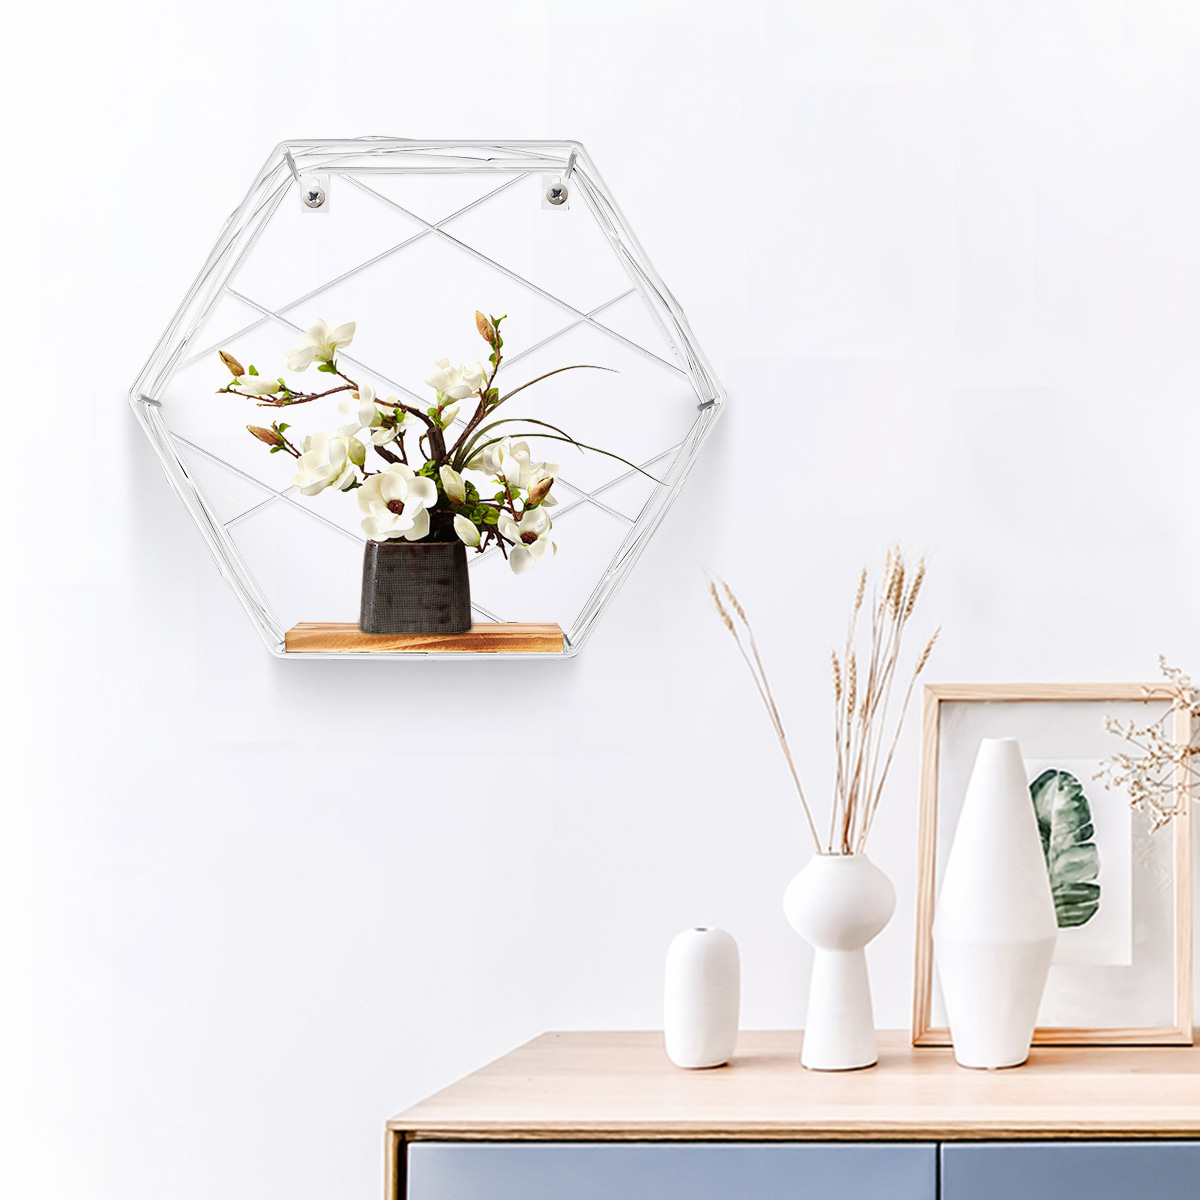 3Pcsset-Hexagonal-Wall-Mounted-Shelves-Floating-Wall-Storage-Rack-Holder-Organizer-Display-Stand-Hom-1792546-9